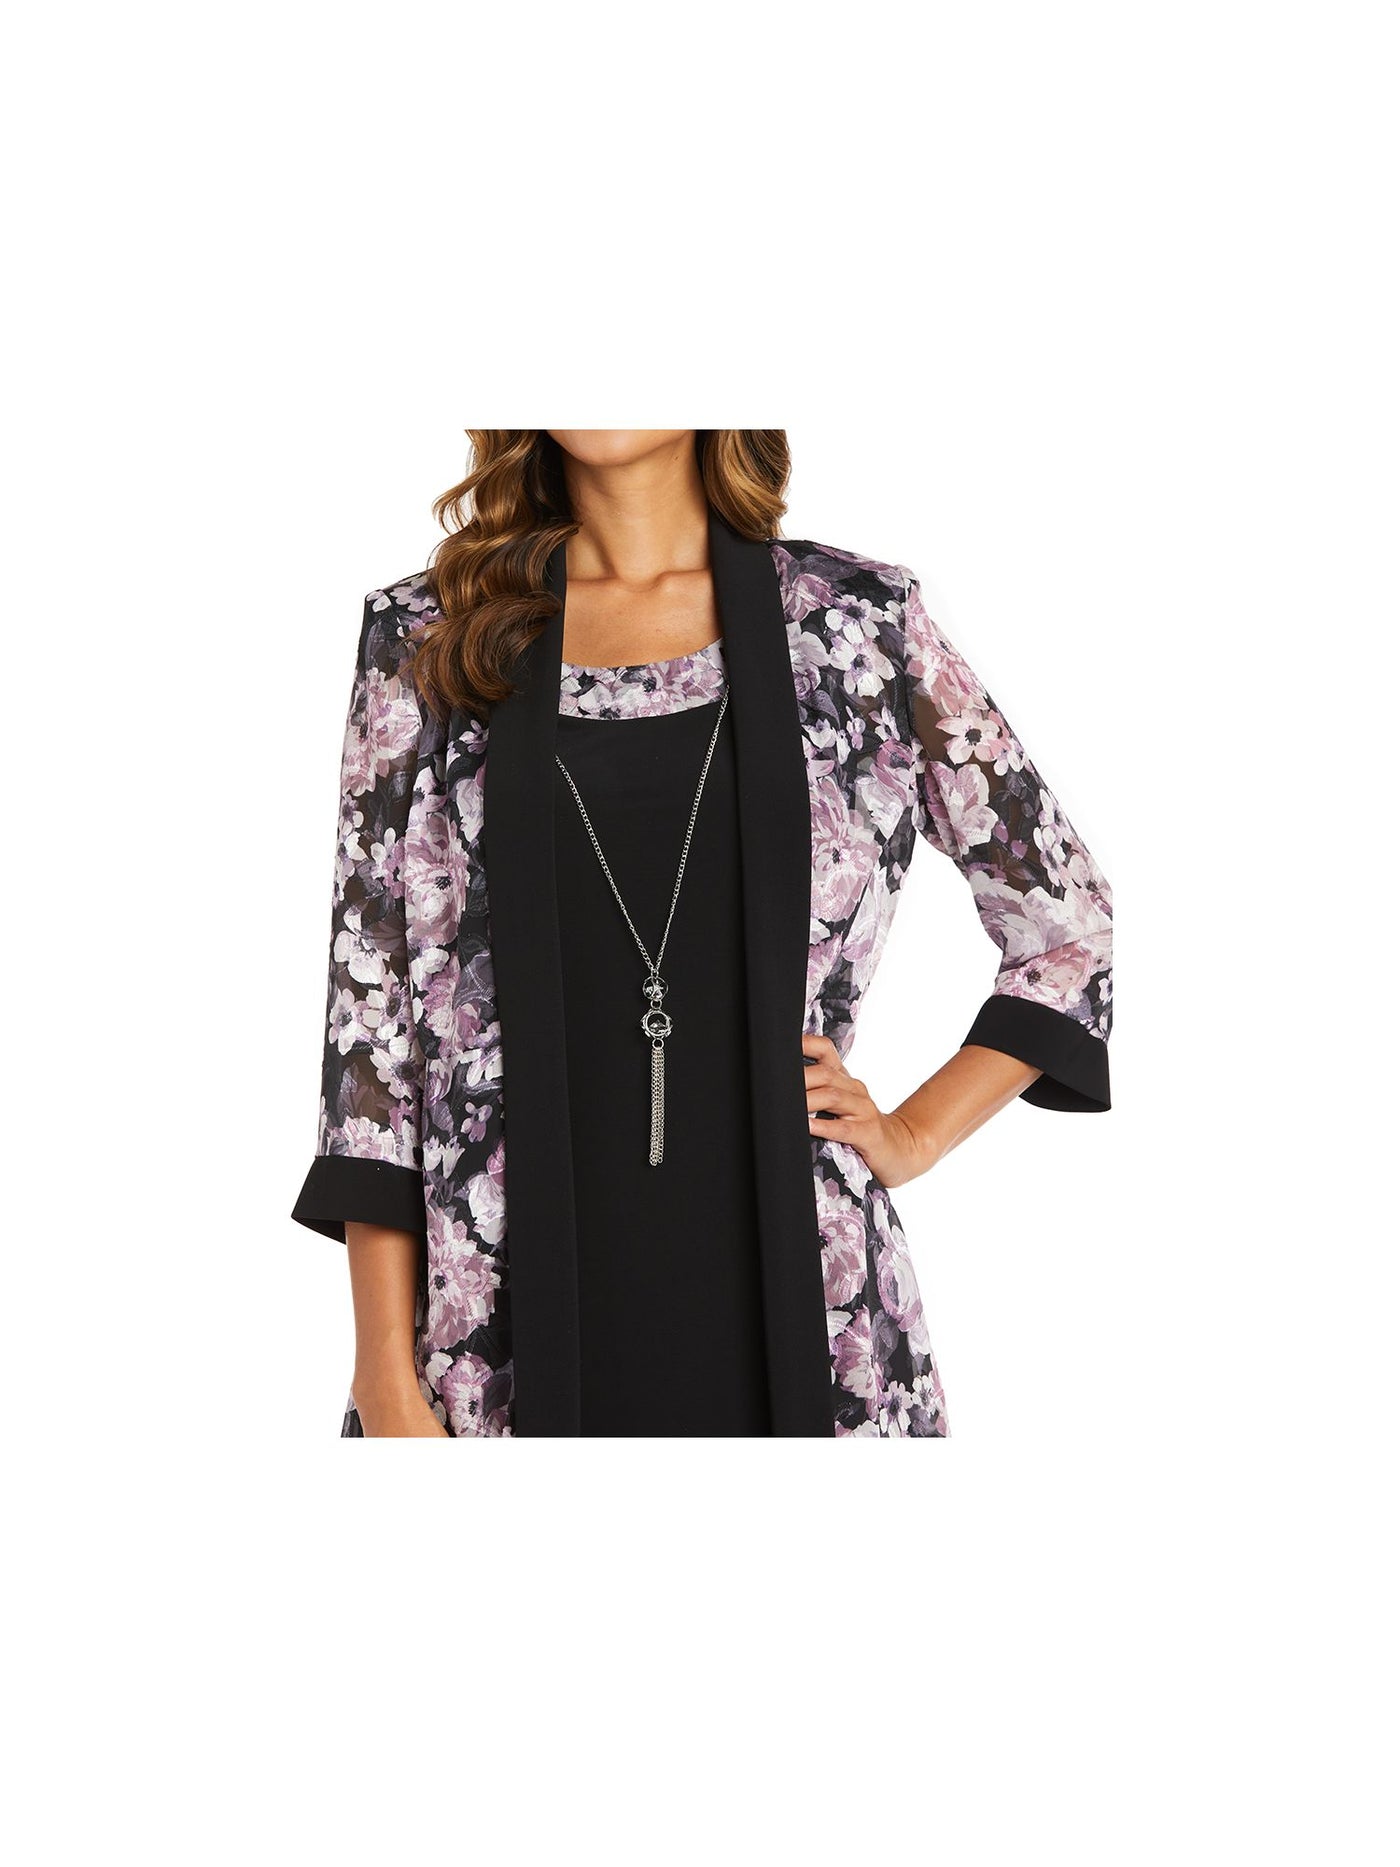 R&M RICHARDS WOMAN Womens Black Sheer Floral 3/4 Sleeve Open Front Cardigan Plus 18W